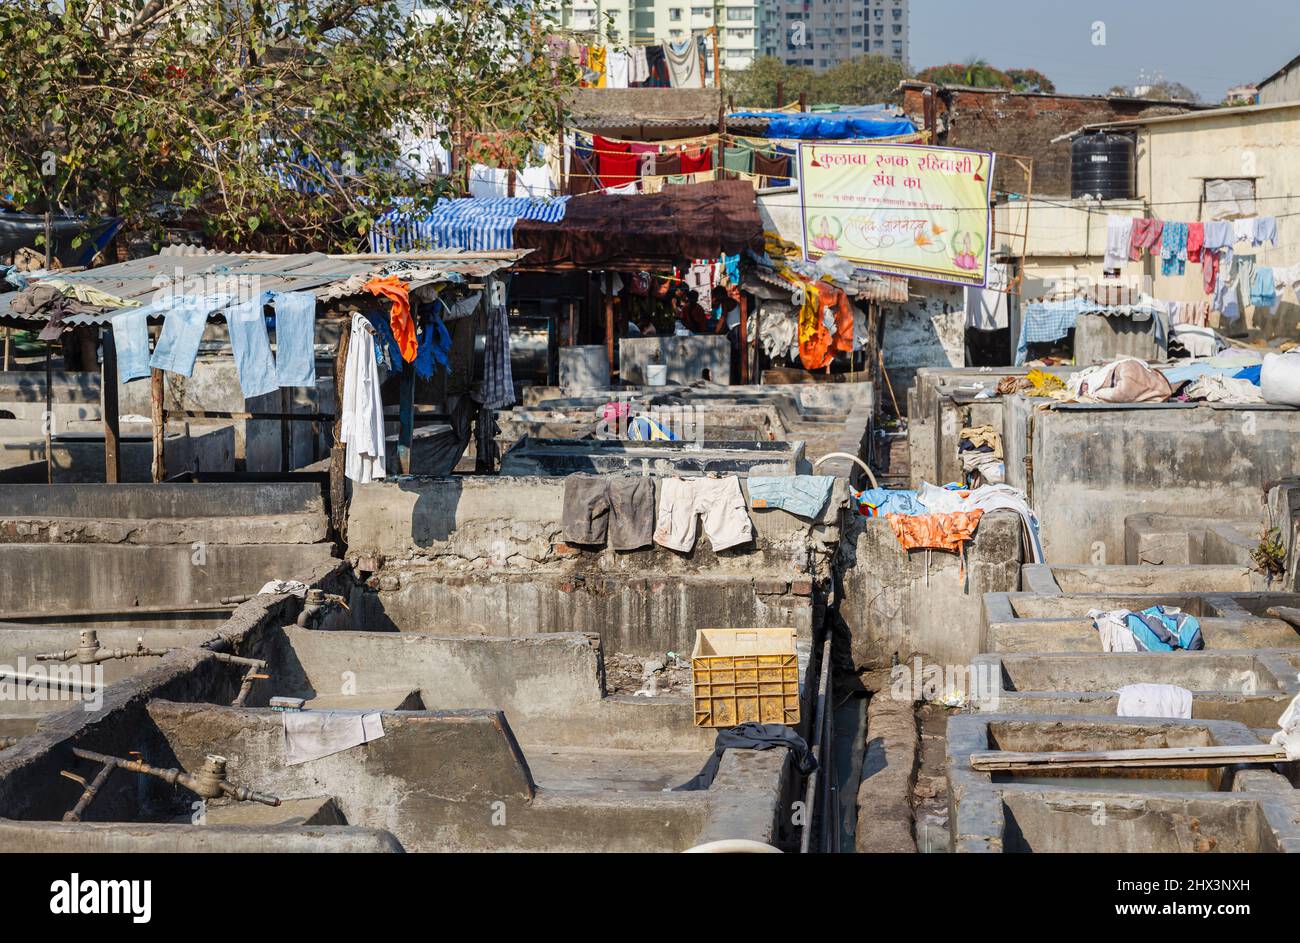 View of rows of concrete wash pens at Mahalaxmi Dhobi Ghat, a large open air laundromat in Mumbai, India Stock Photo